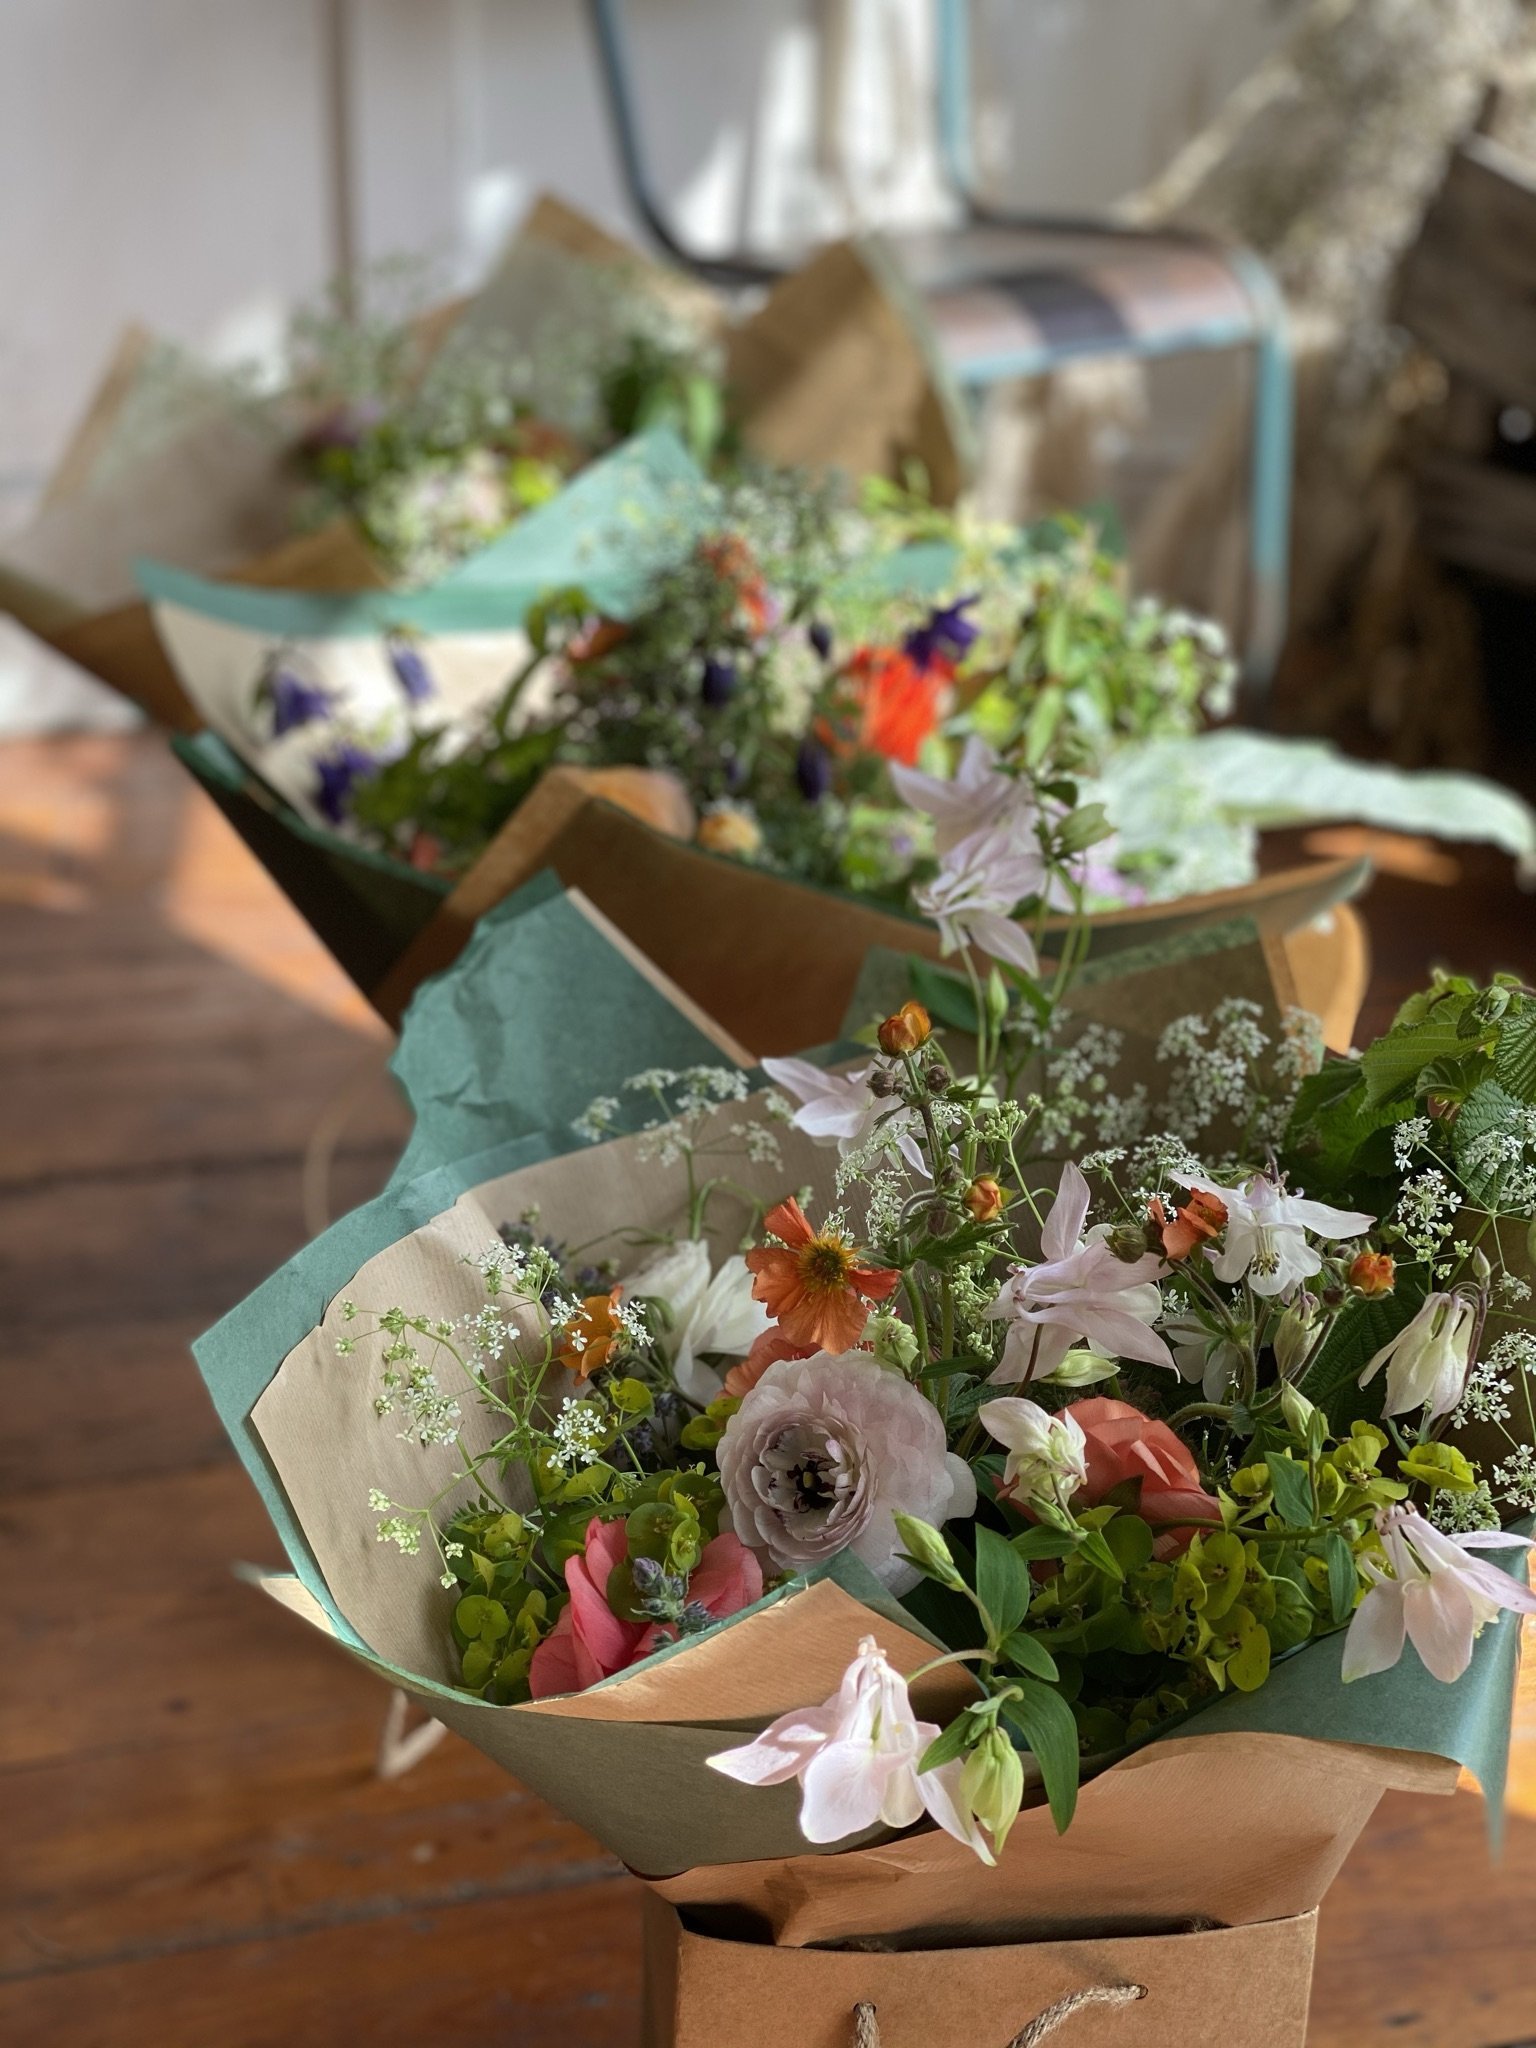 A line up of beautifully packaged hand tied bouquets on a wooden floor